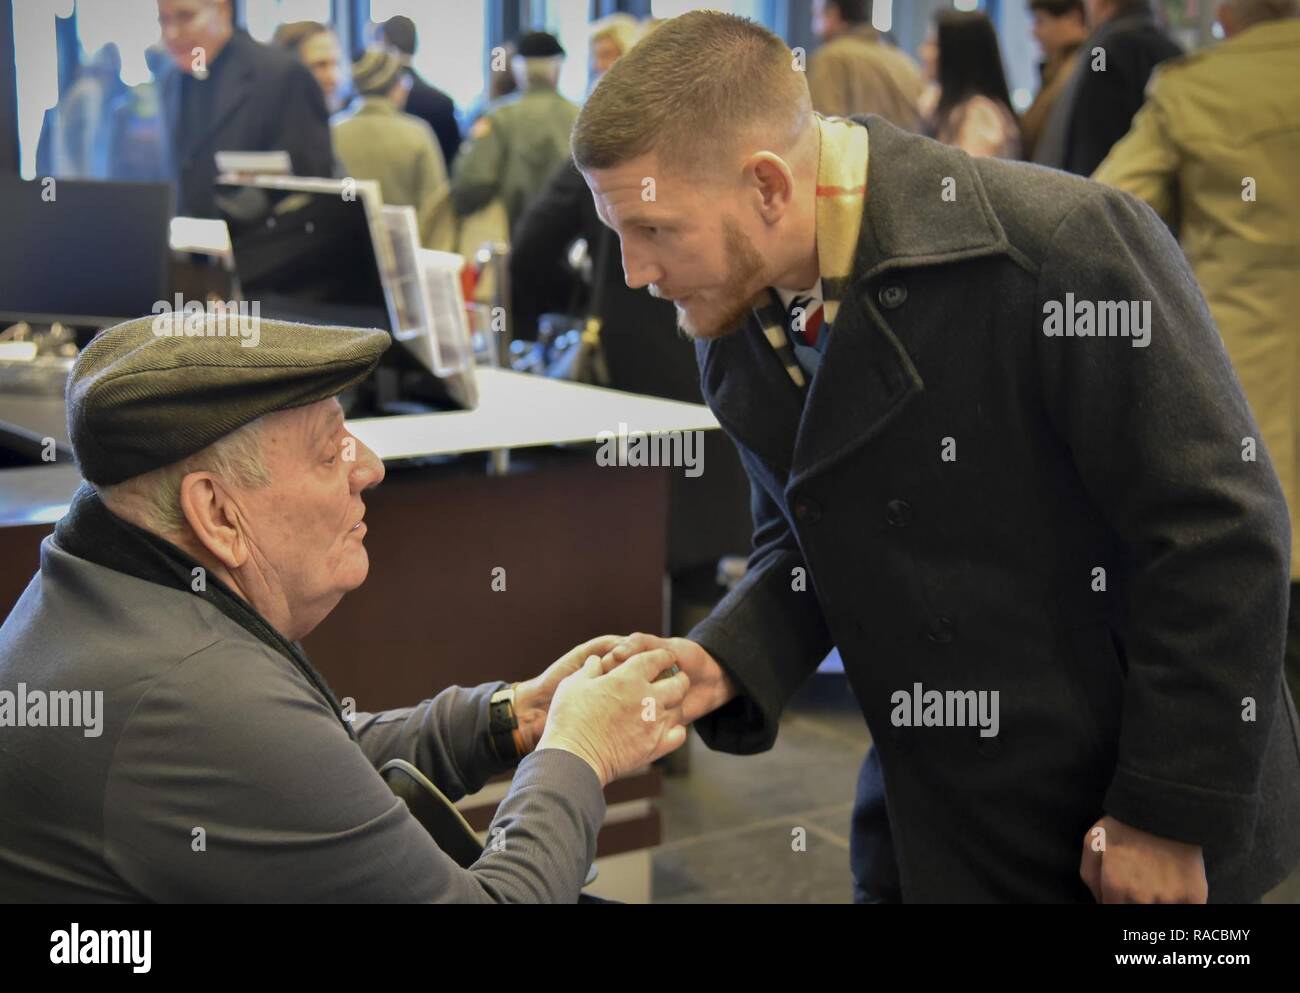 Former U.S. Army Spc. Kenneth Stumpf, Medal of Honor recipient and retired U.S. Marine Corps Cpl. William Kyle Carpenter, Medal of Honor recipient, exchange coins during a traditional Inaugural Day Medal of Honor breakfast held at the Reserve Officers Association headquarters in Washington D.C., January 20, 2017. Stock Photo